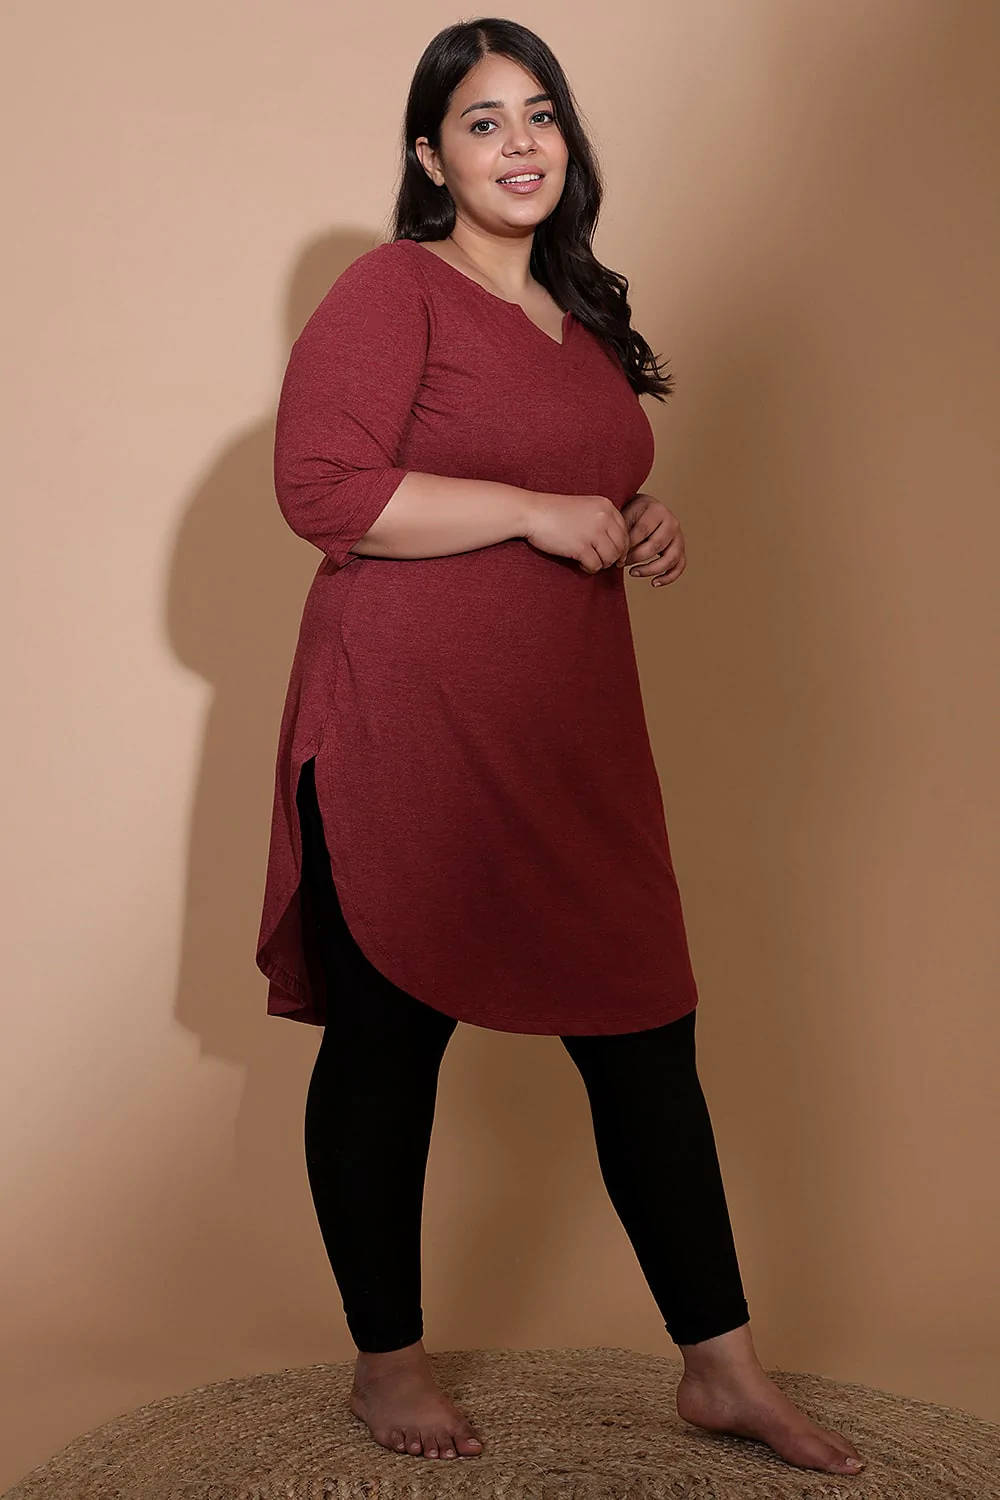 A Confident Plus-size Individual in Bright Red Apparel Wallpaper